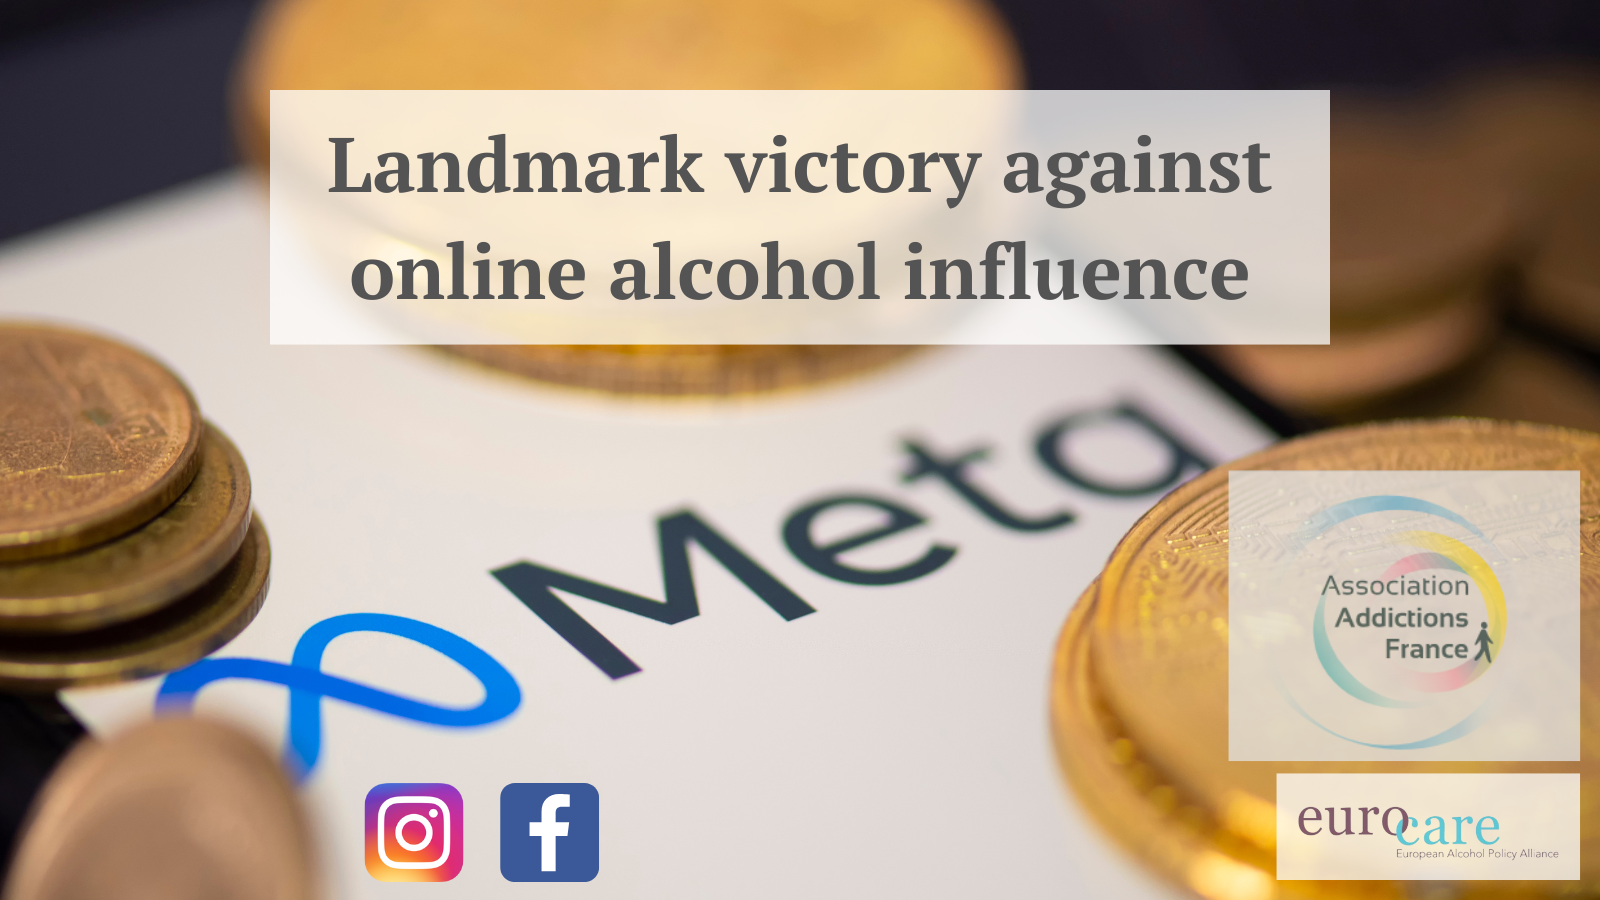 A landmark victory against online alcohol influence